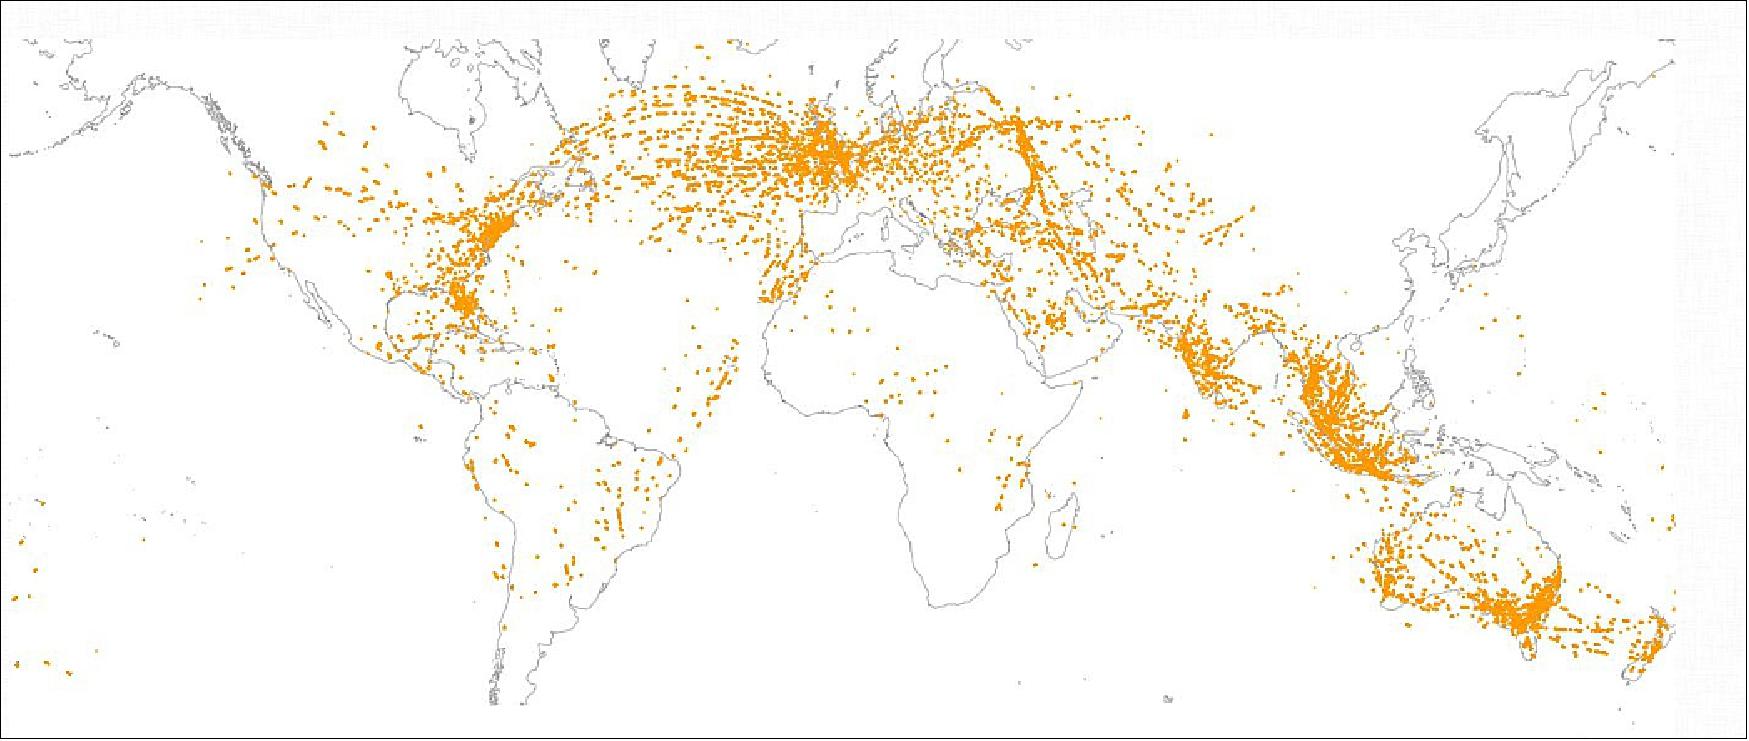 Figure 28: Spire single satellite ADS-B results. Data collection over recent 11 days, 1 hour per day: > 750K messages and > 250K positions (image credit: Spire Global)